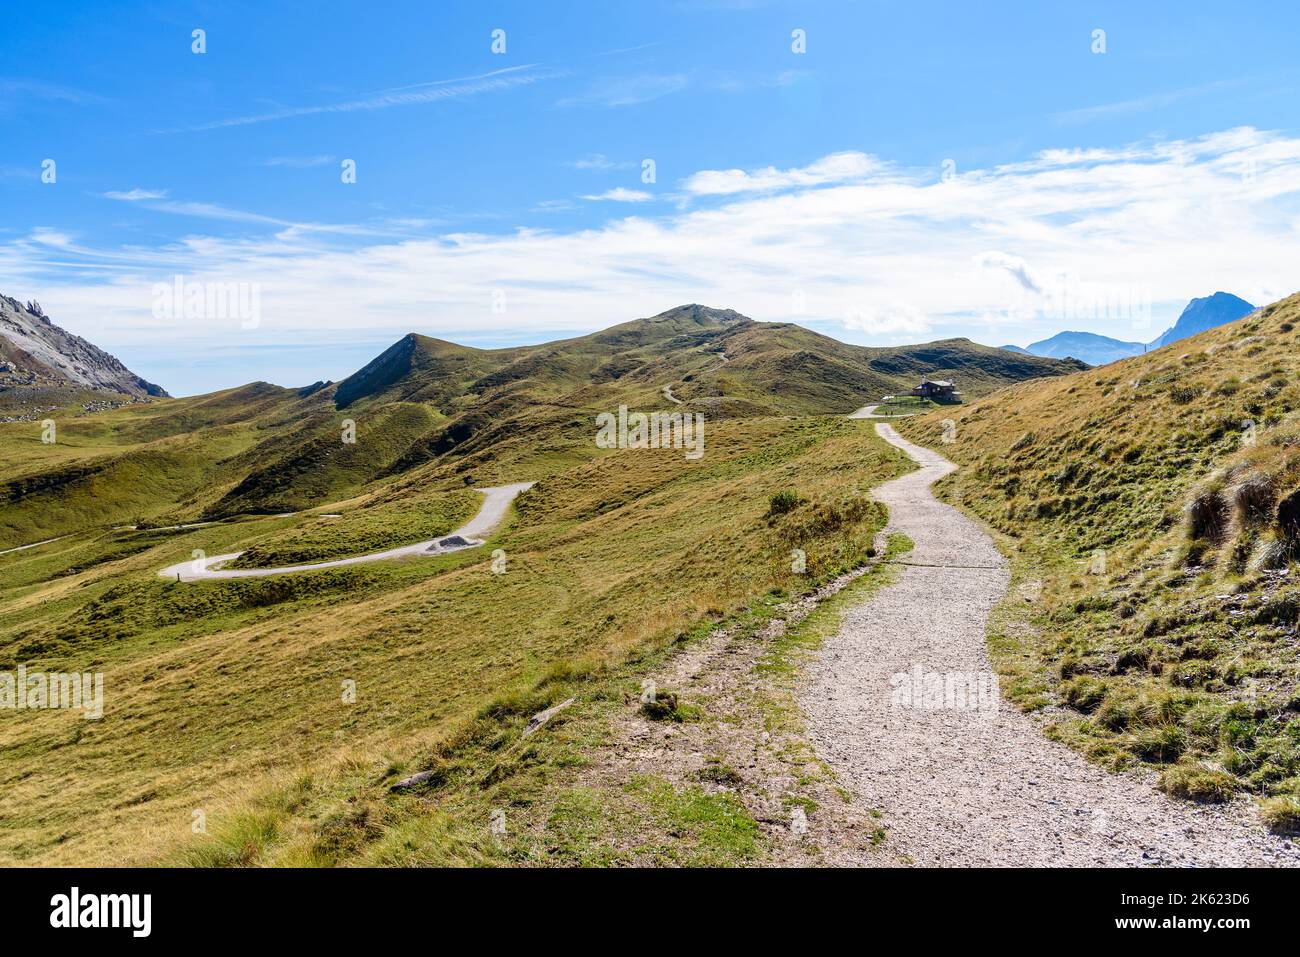 Deserted winding high altitute trail in the Alps on a clear autumn day Stock Photo